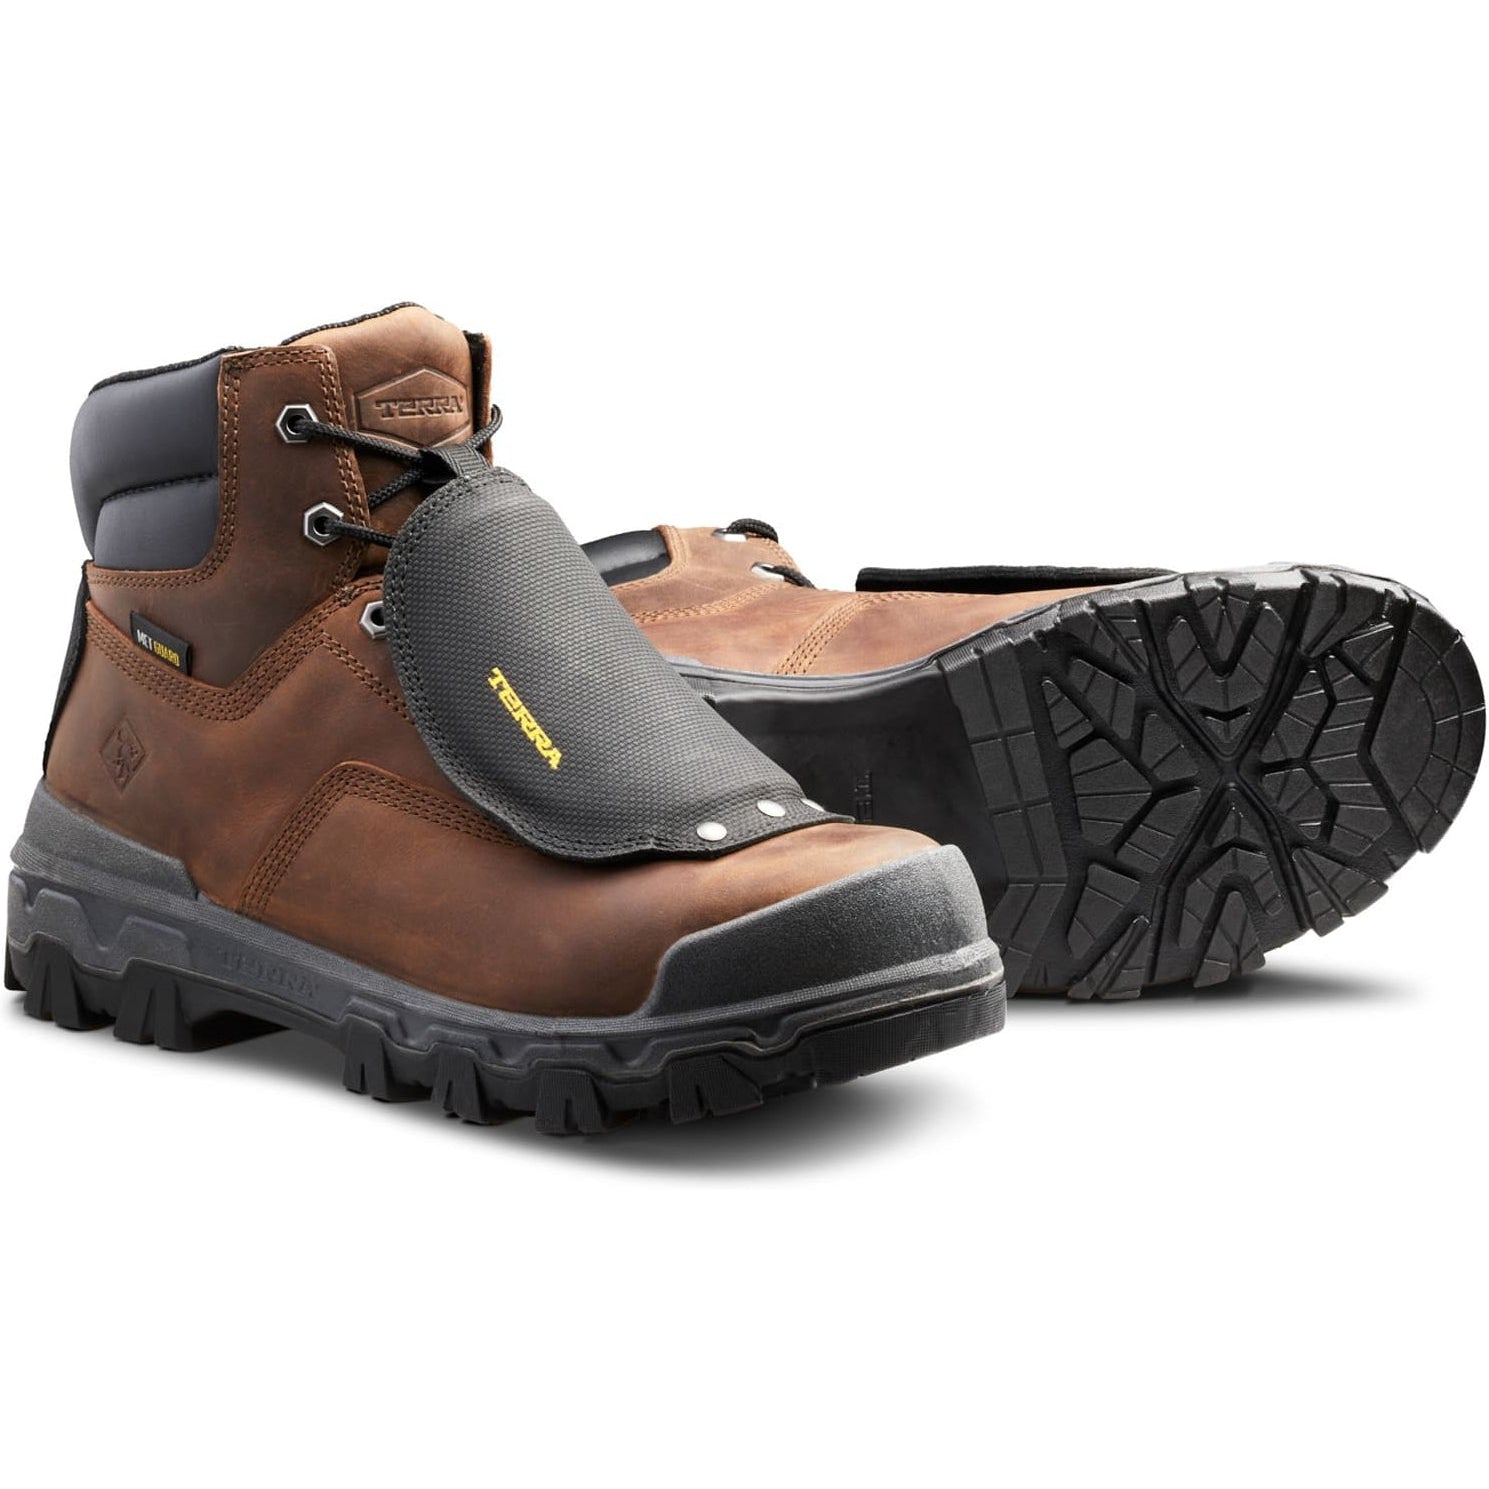 Terra Men's Sentry 2020 6" Comp Toe WP Safety Work Boot -Brown- 4NRXBN  - Overlook Boots